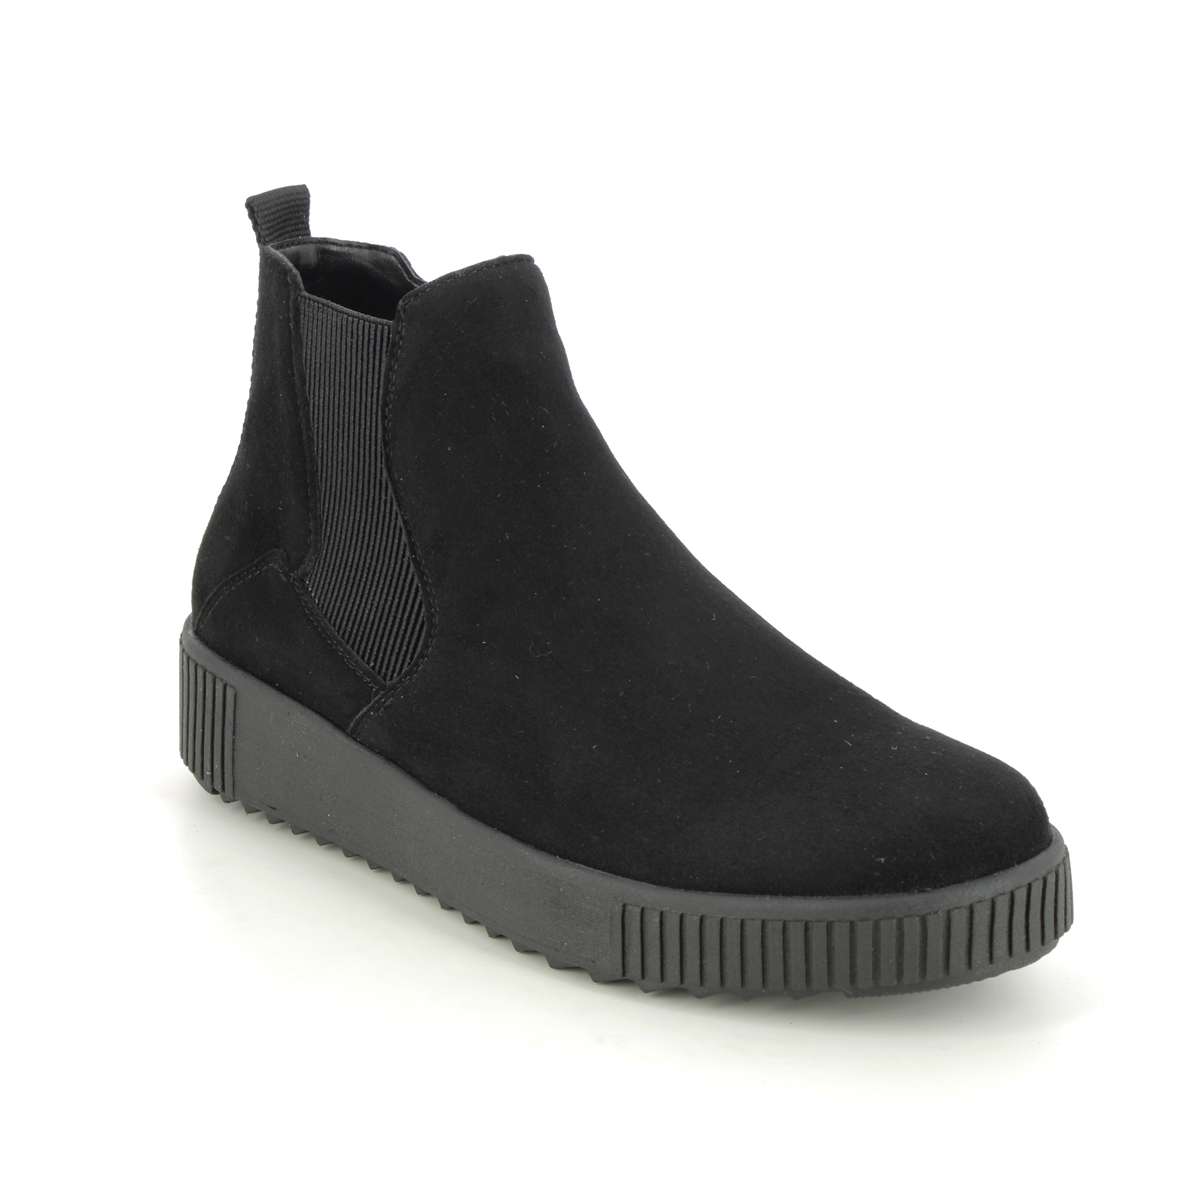 Remonte R7994-01 Lourdes Black Suede Womens Chelsea Boots in a Plain Leather in Size 37